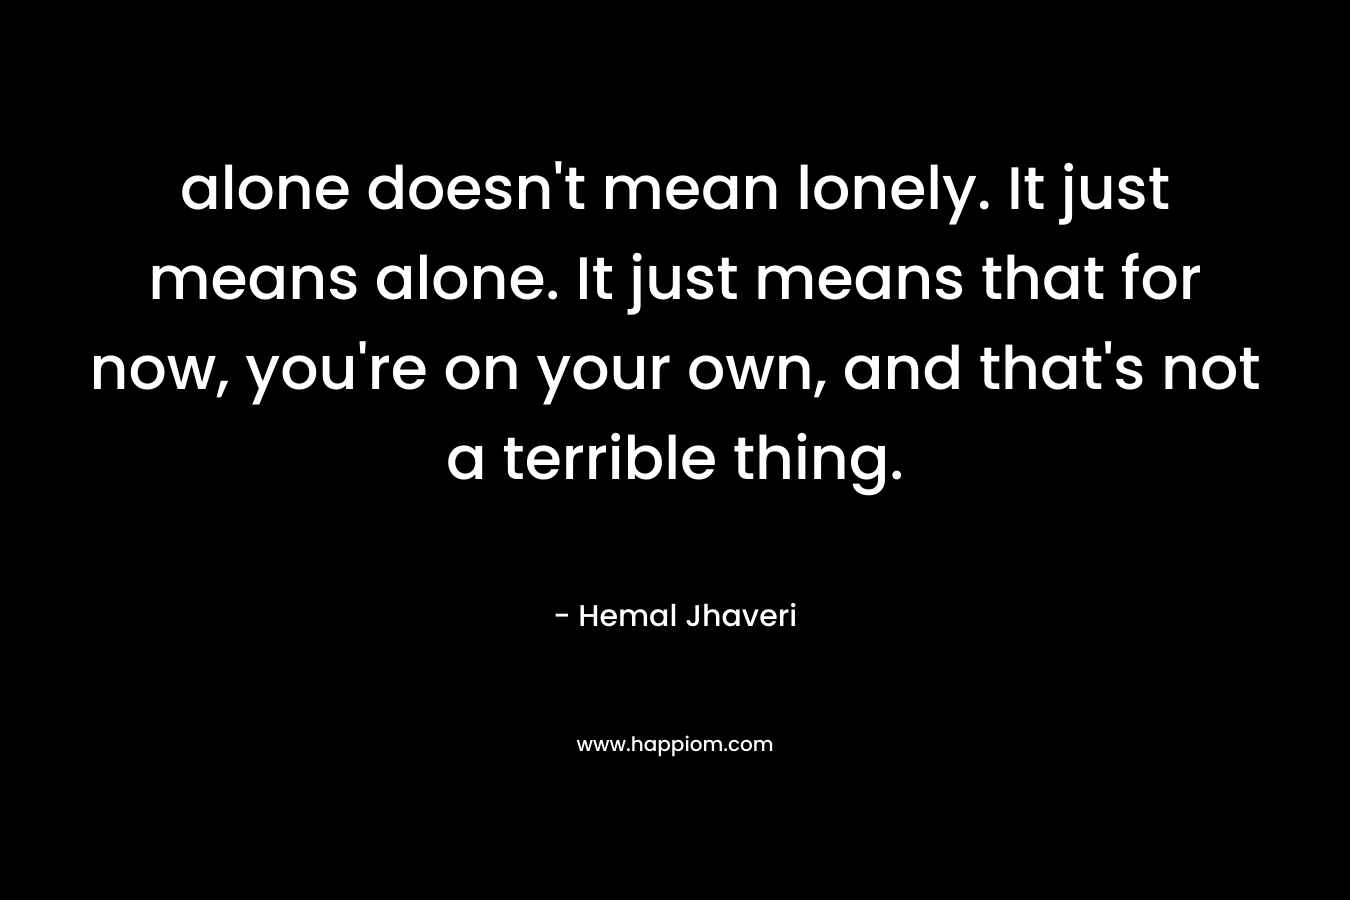 alone doesn't mean lonely. It just means alone. It just means that for now, you're on your own, and that's not a terrible thing.